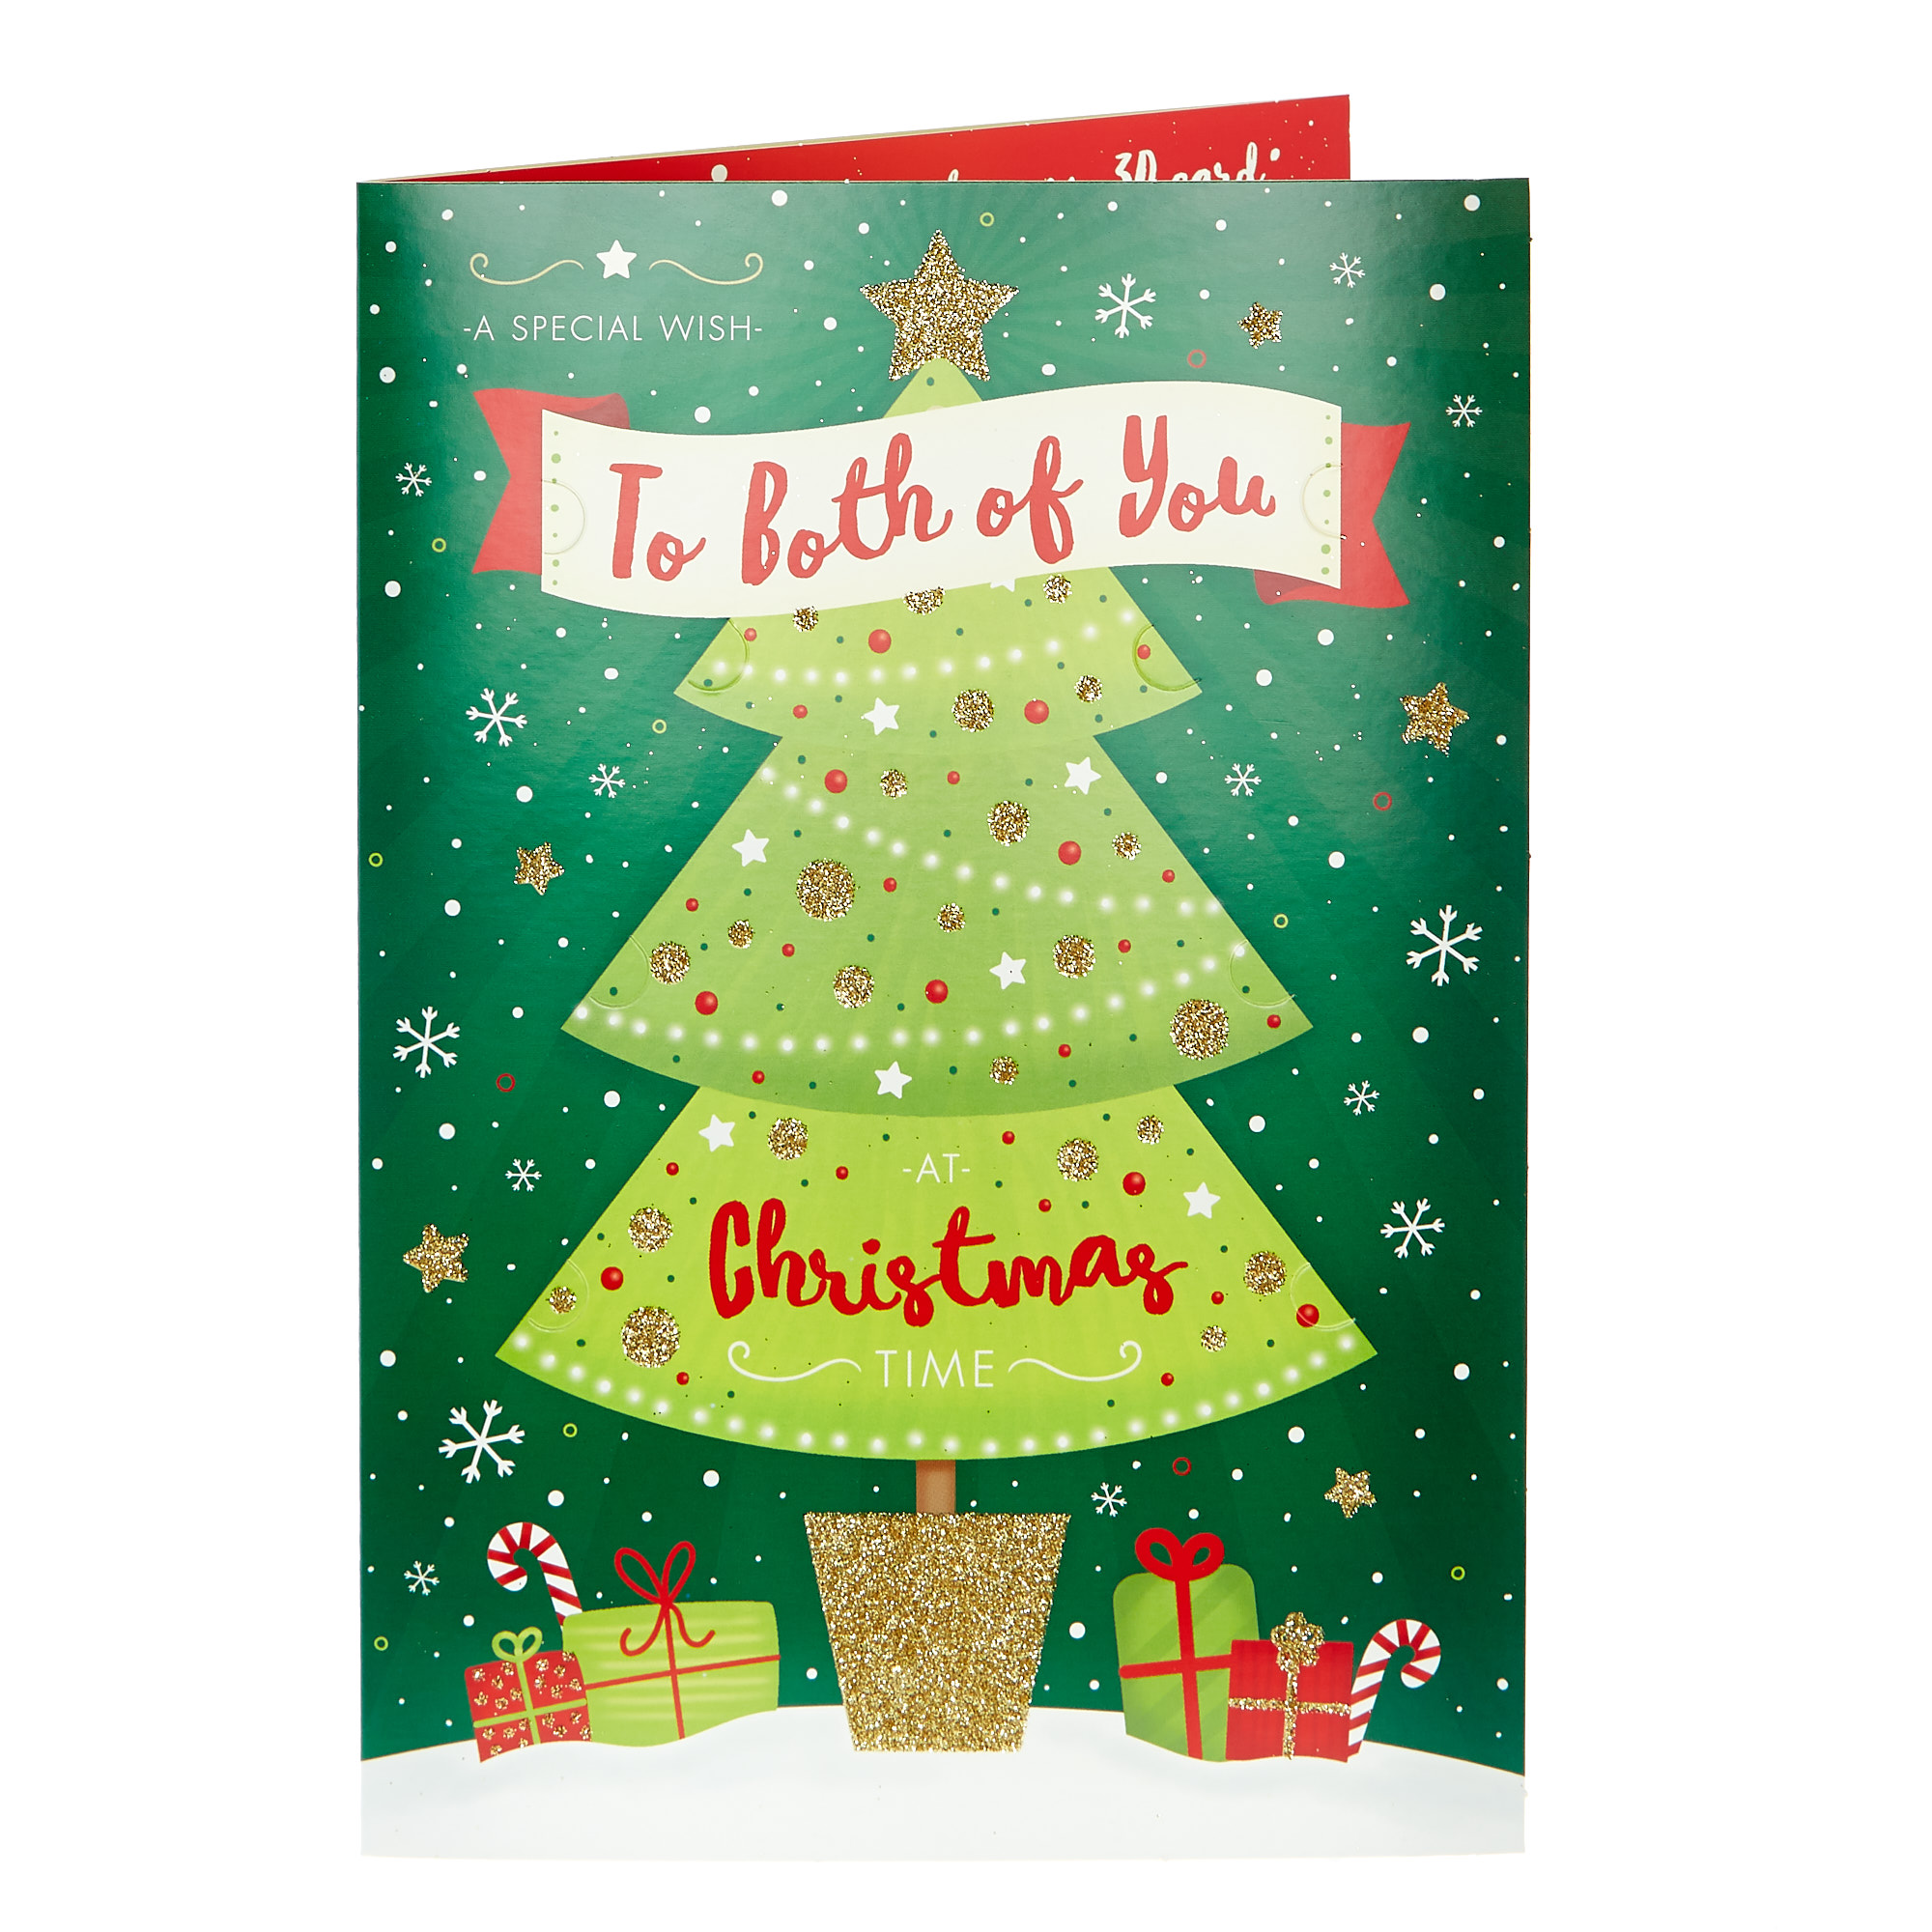 3D Pop-Out Christmas Card - To Both of You